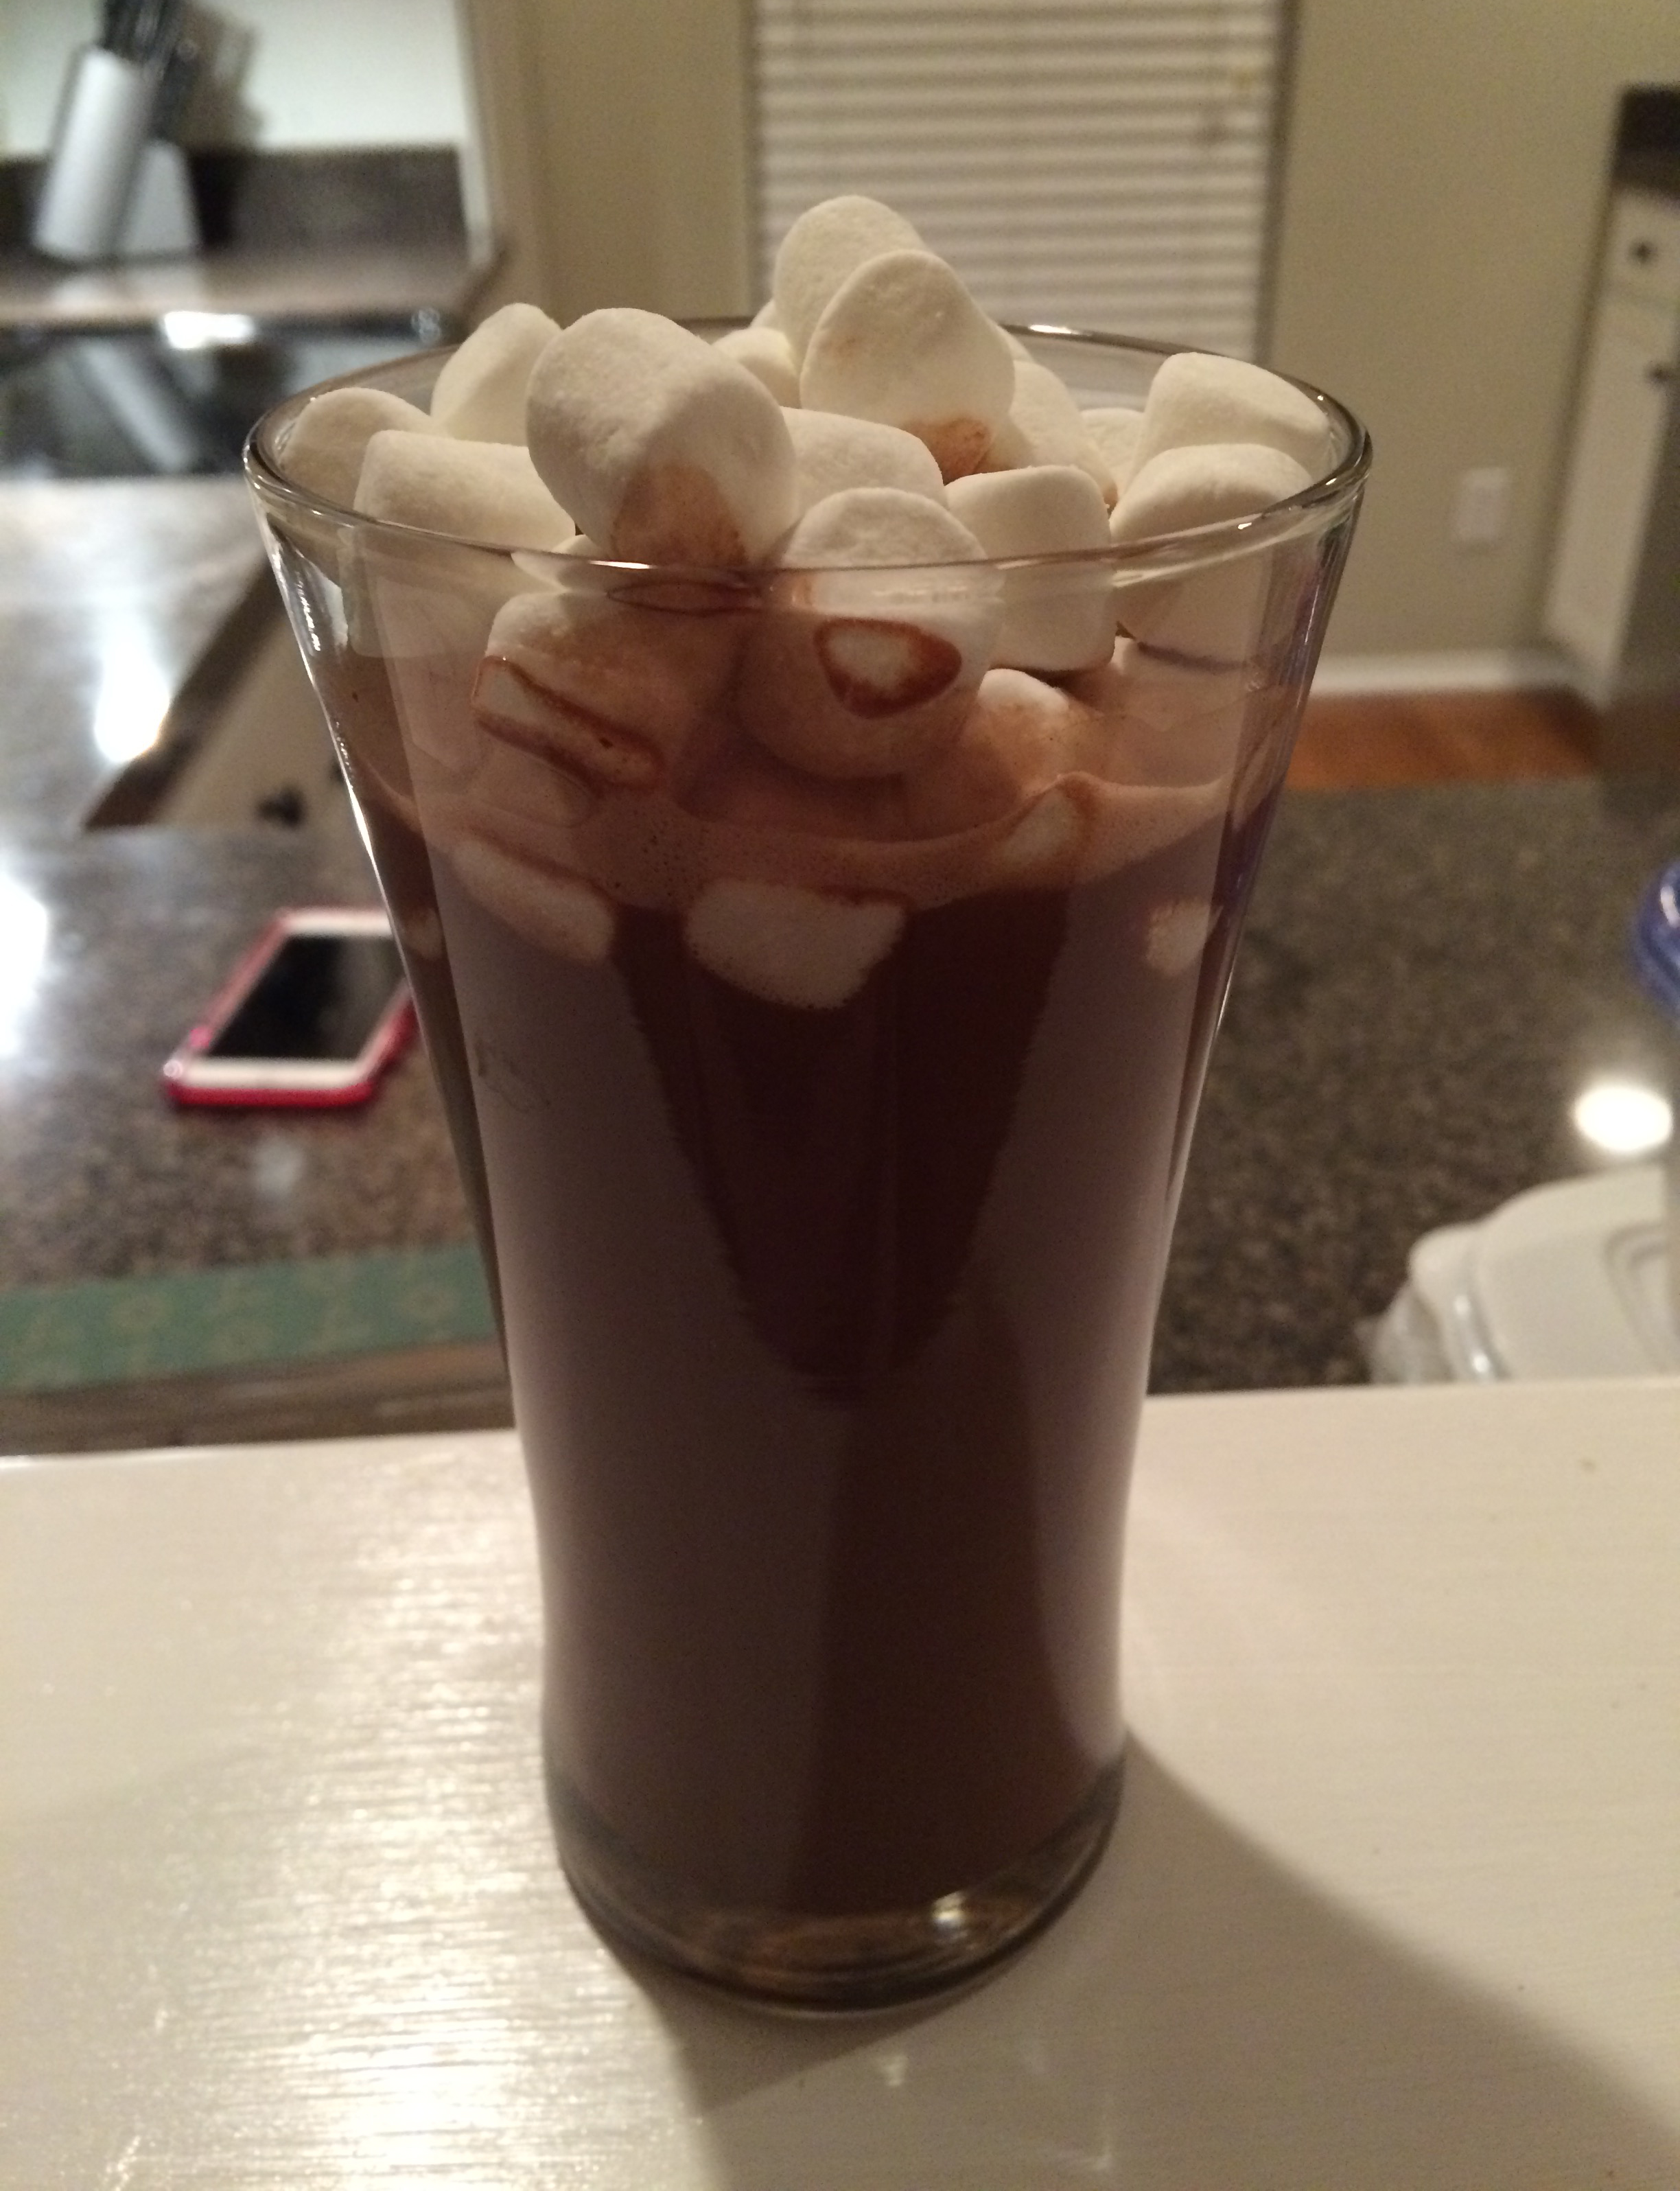 This was my delicious cup of hot chocolate I enjoyed at Sid's this past Saturday.